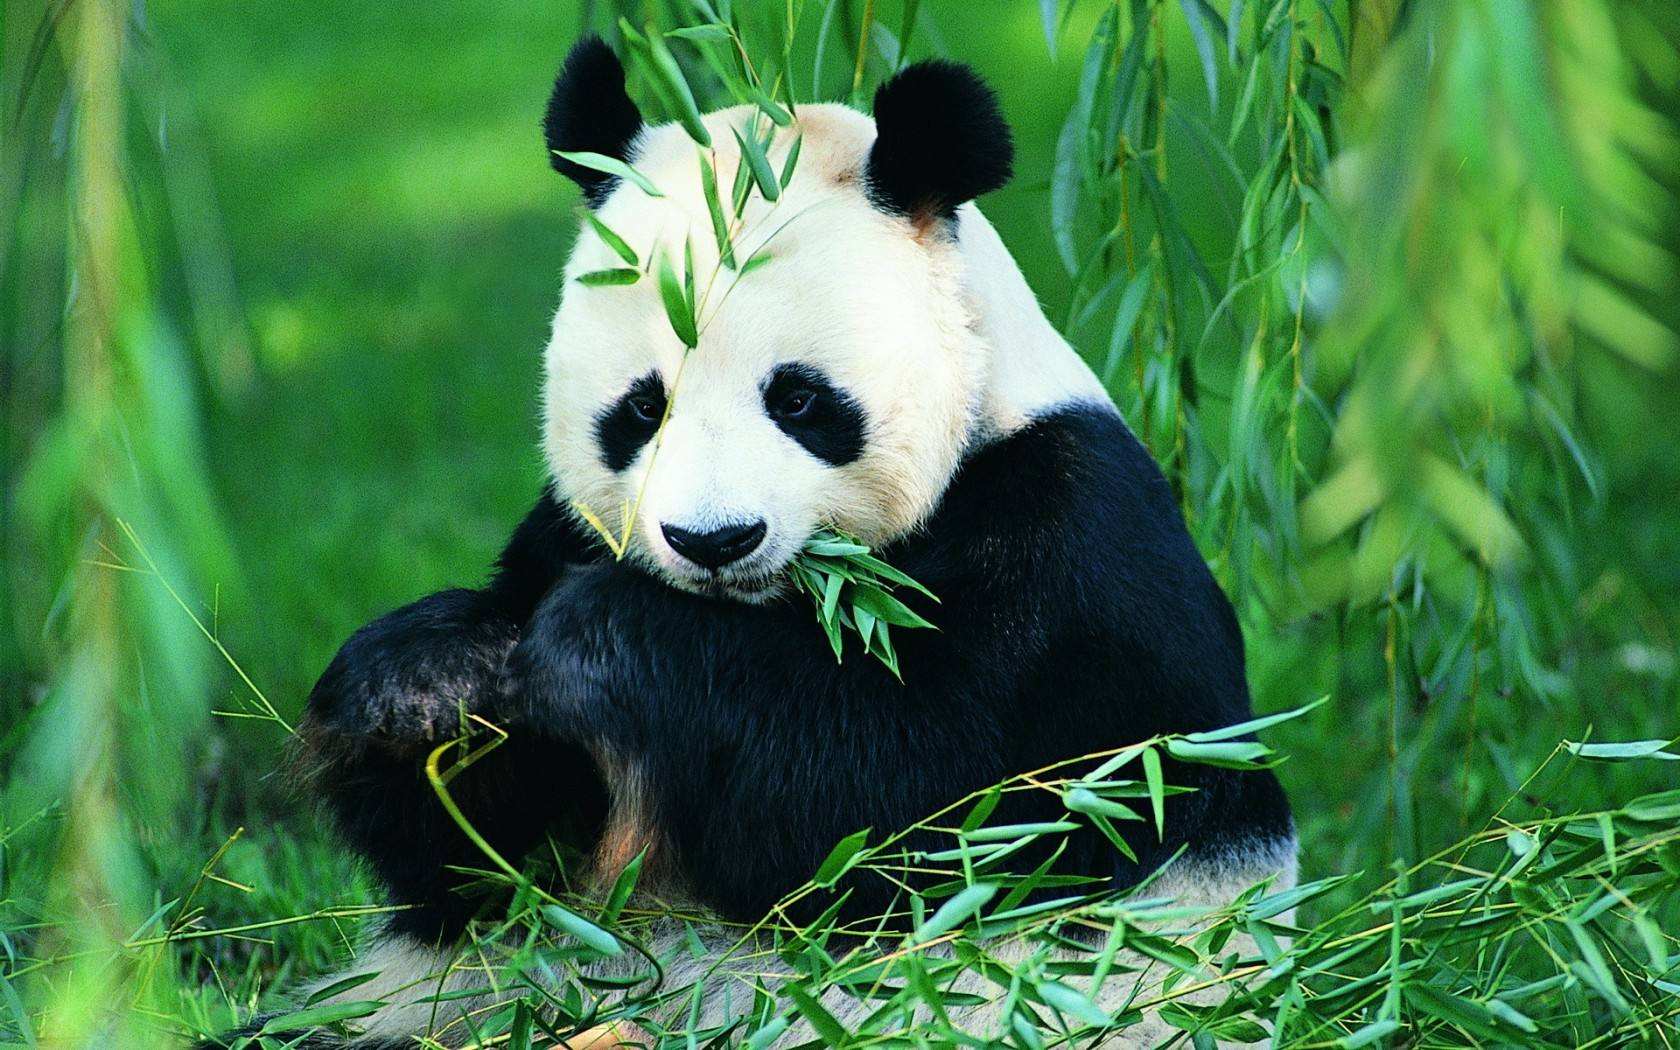 Research Reveals Giant Pandas' More Diversified Diet 5,000 Years Ago